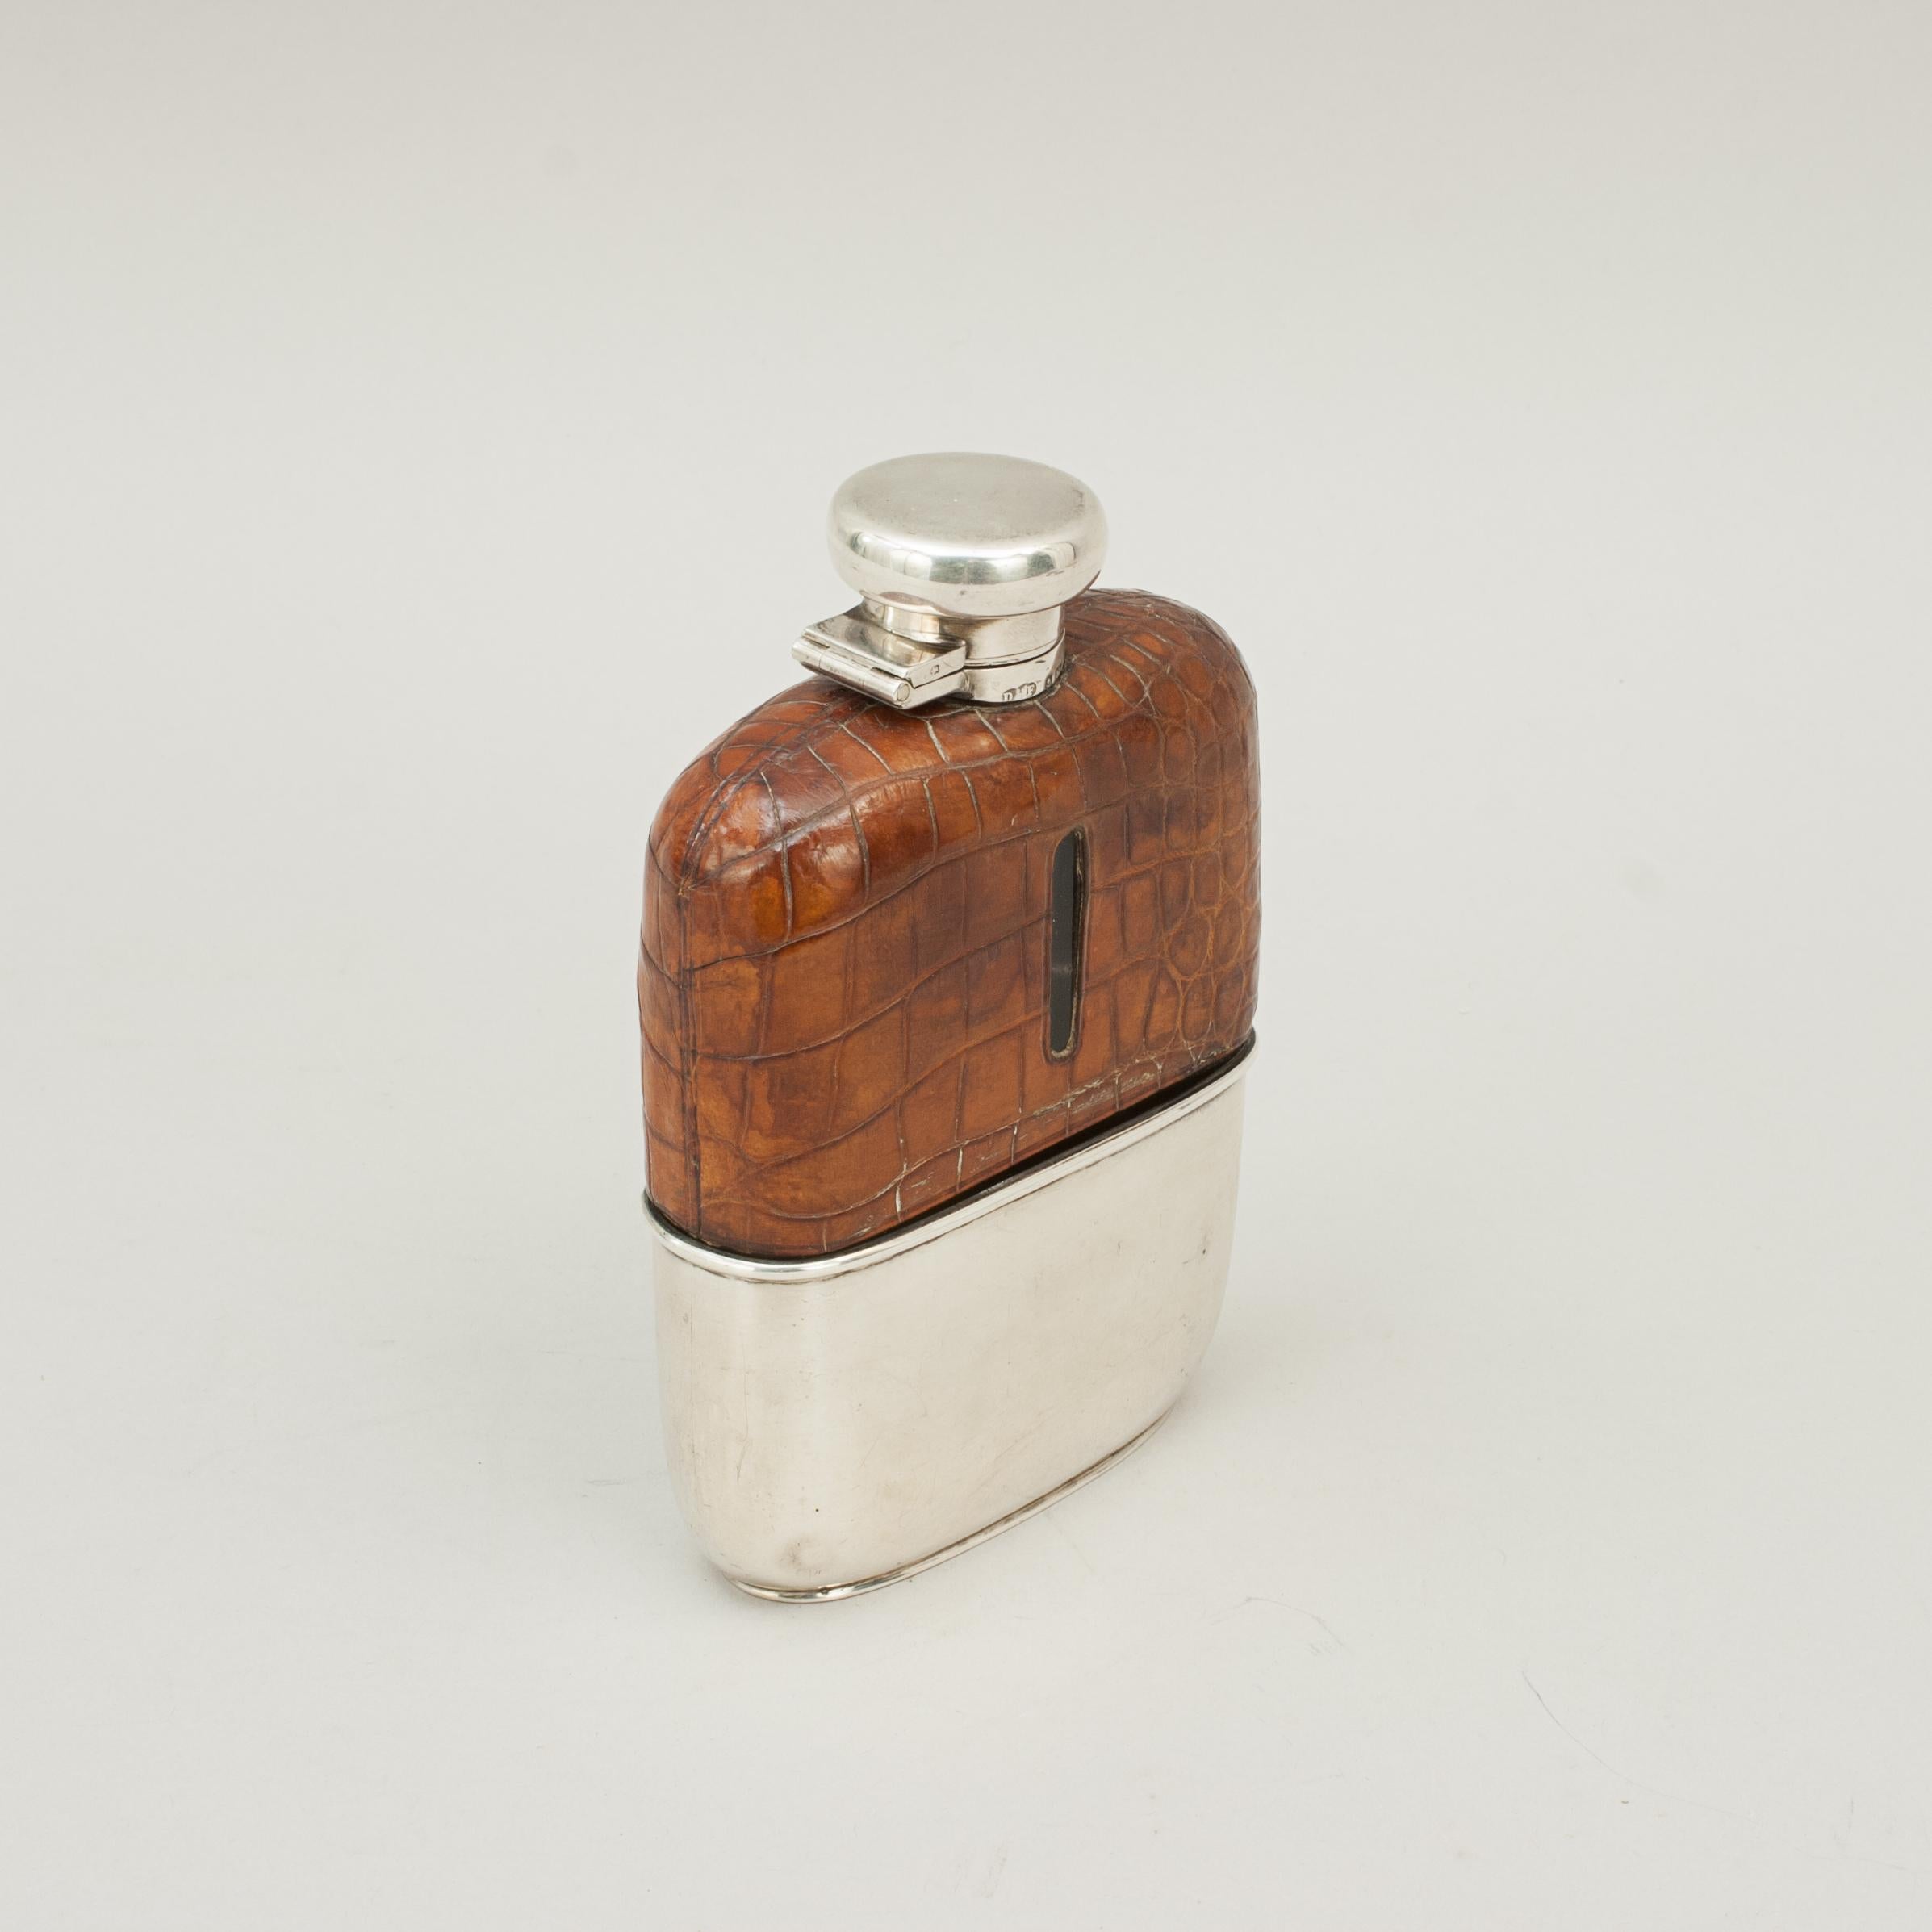 English Vintage Silver Hip Flask with Leather Cover by Deakin & Francis, Birmingham 1926